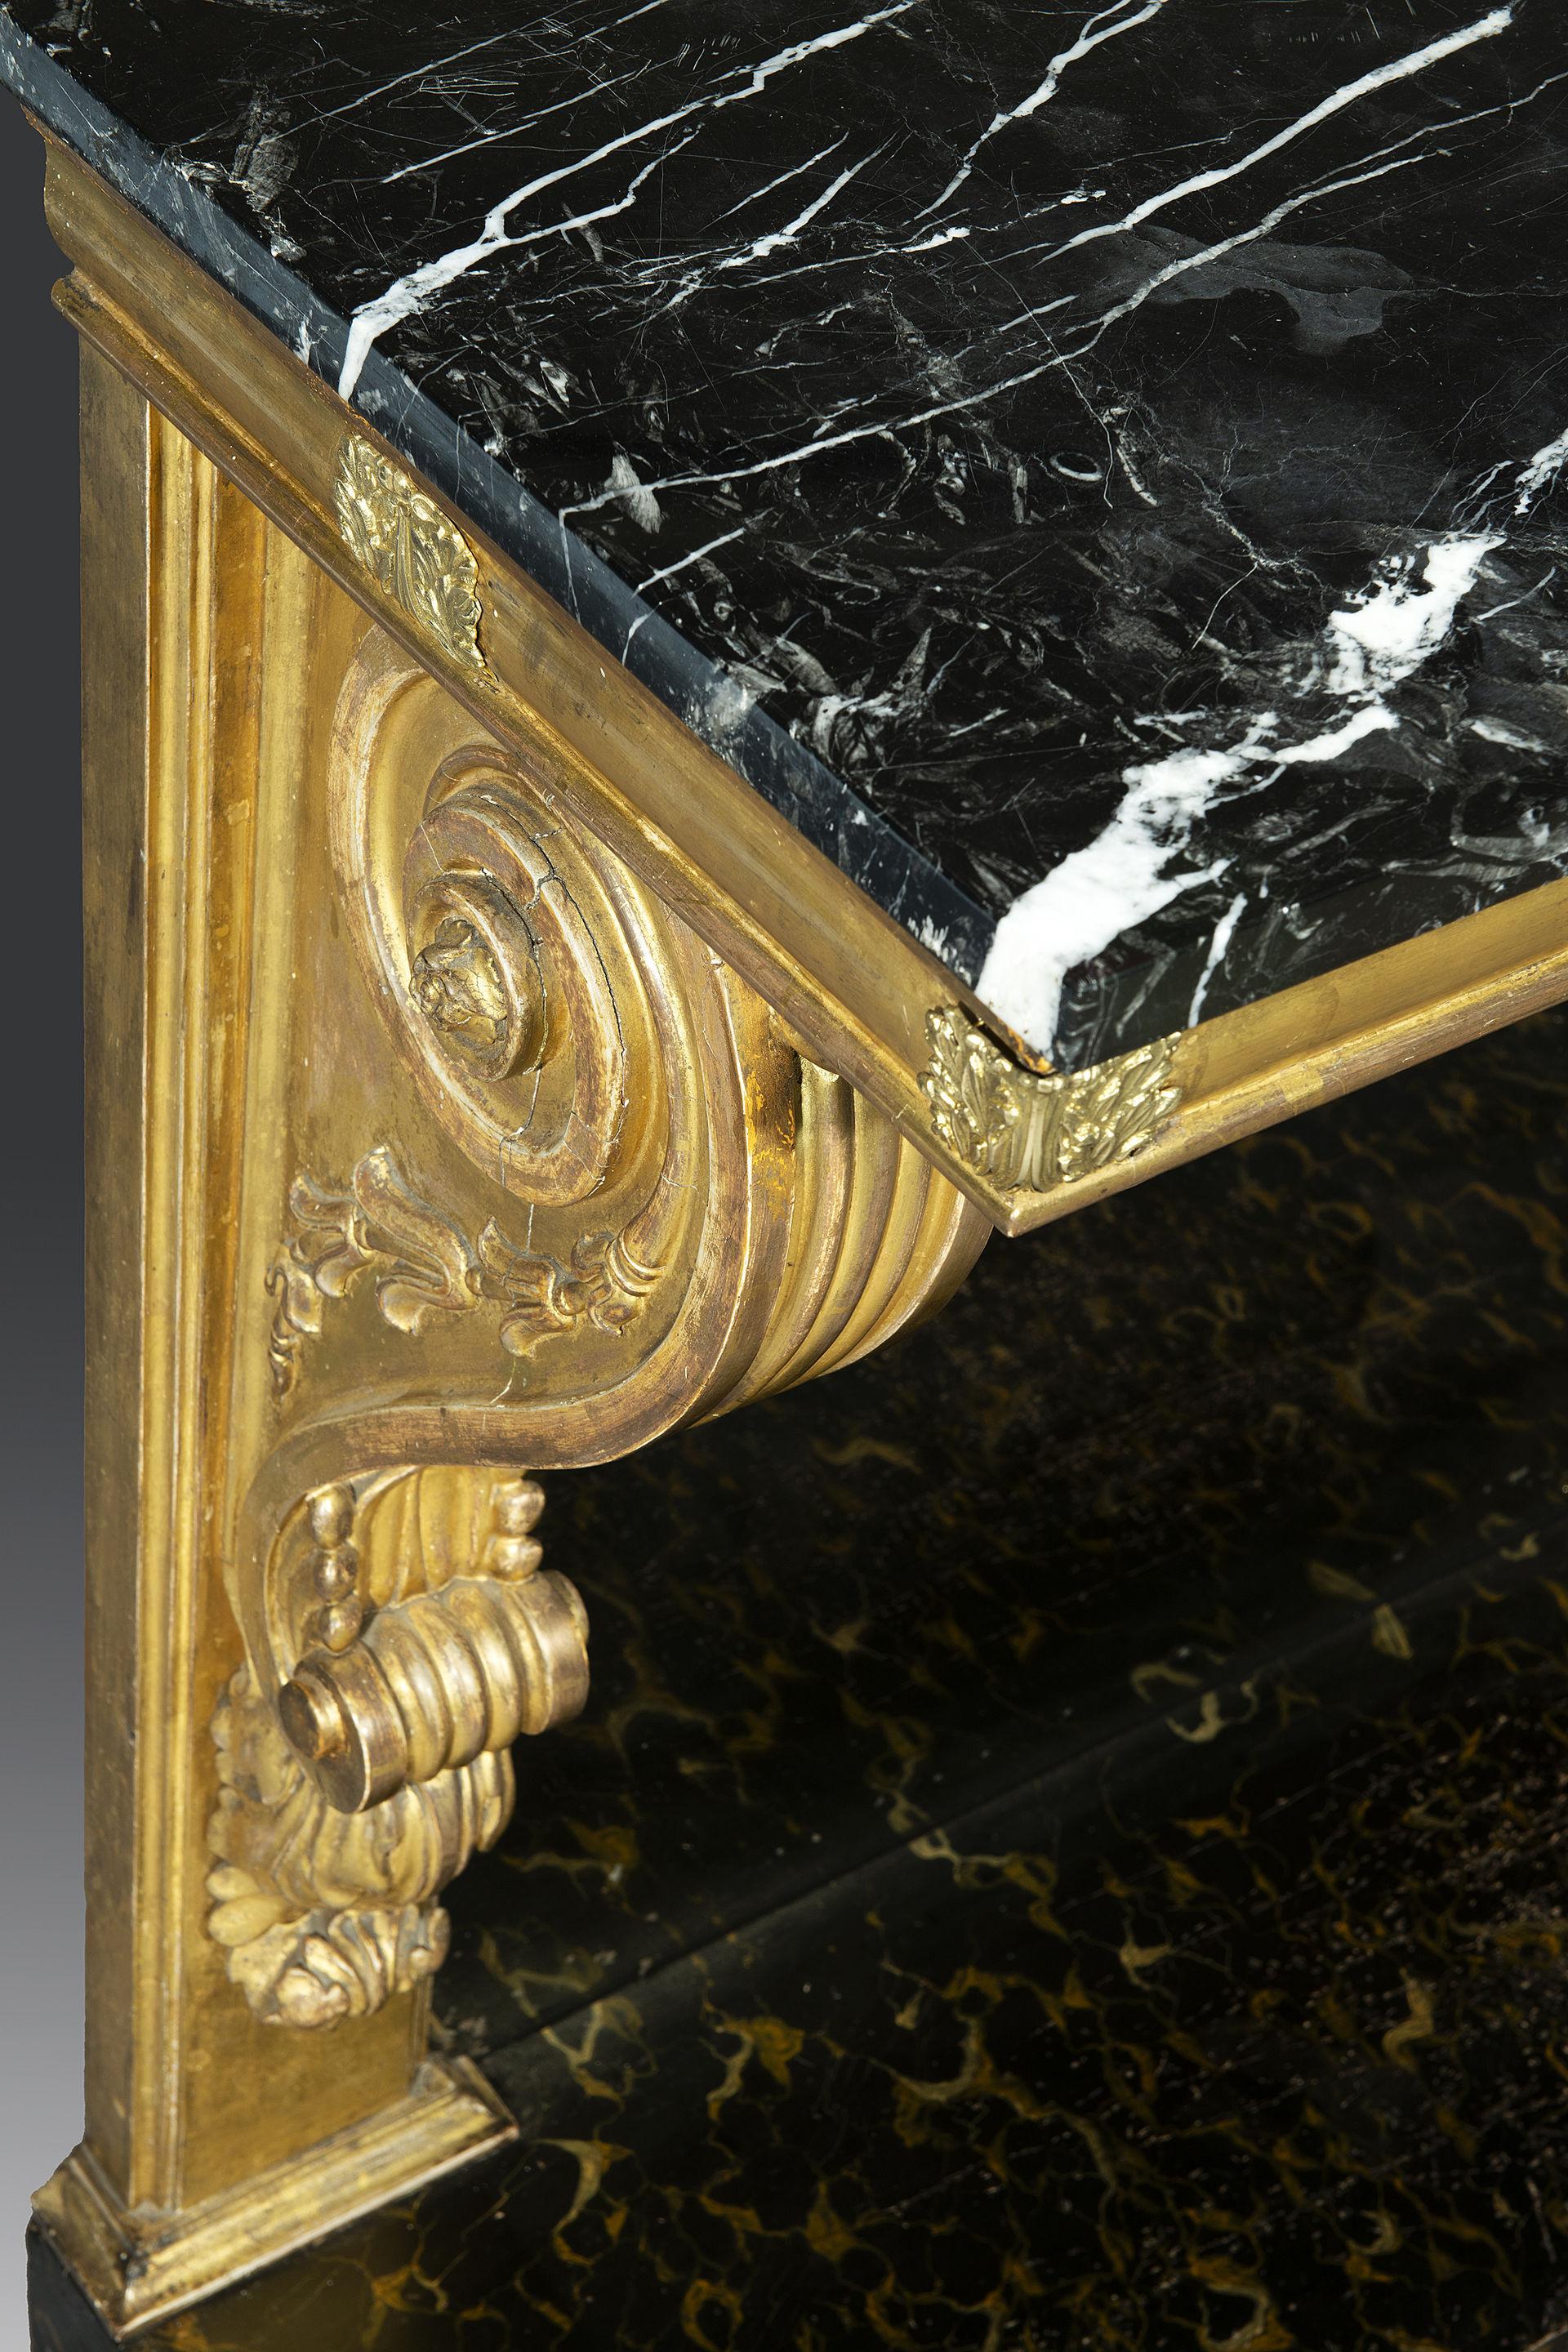 Early 19th Century Regency Period Carved Giltwood Marble Top Console Table im Zustand „Gut“ im Angebot in Bradford on Avon, GB